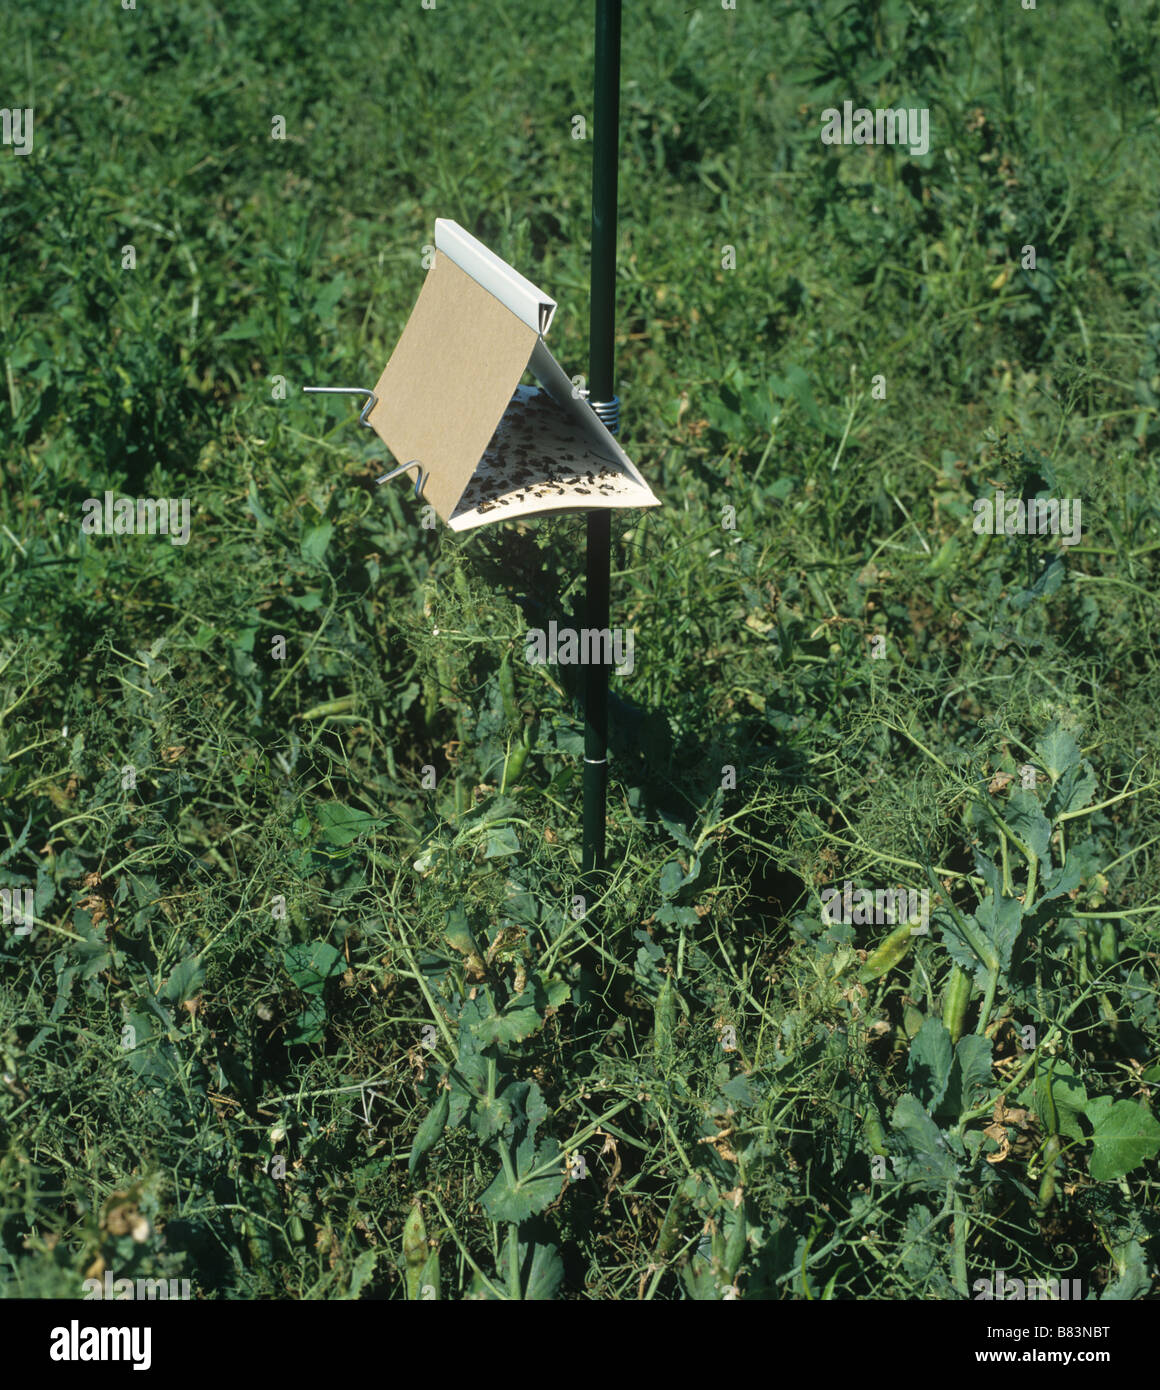 A pheromone trap in a pea crop used for trapping adult male pea moths Cydia nigricana Stock Photo